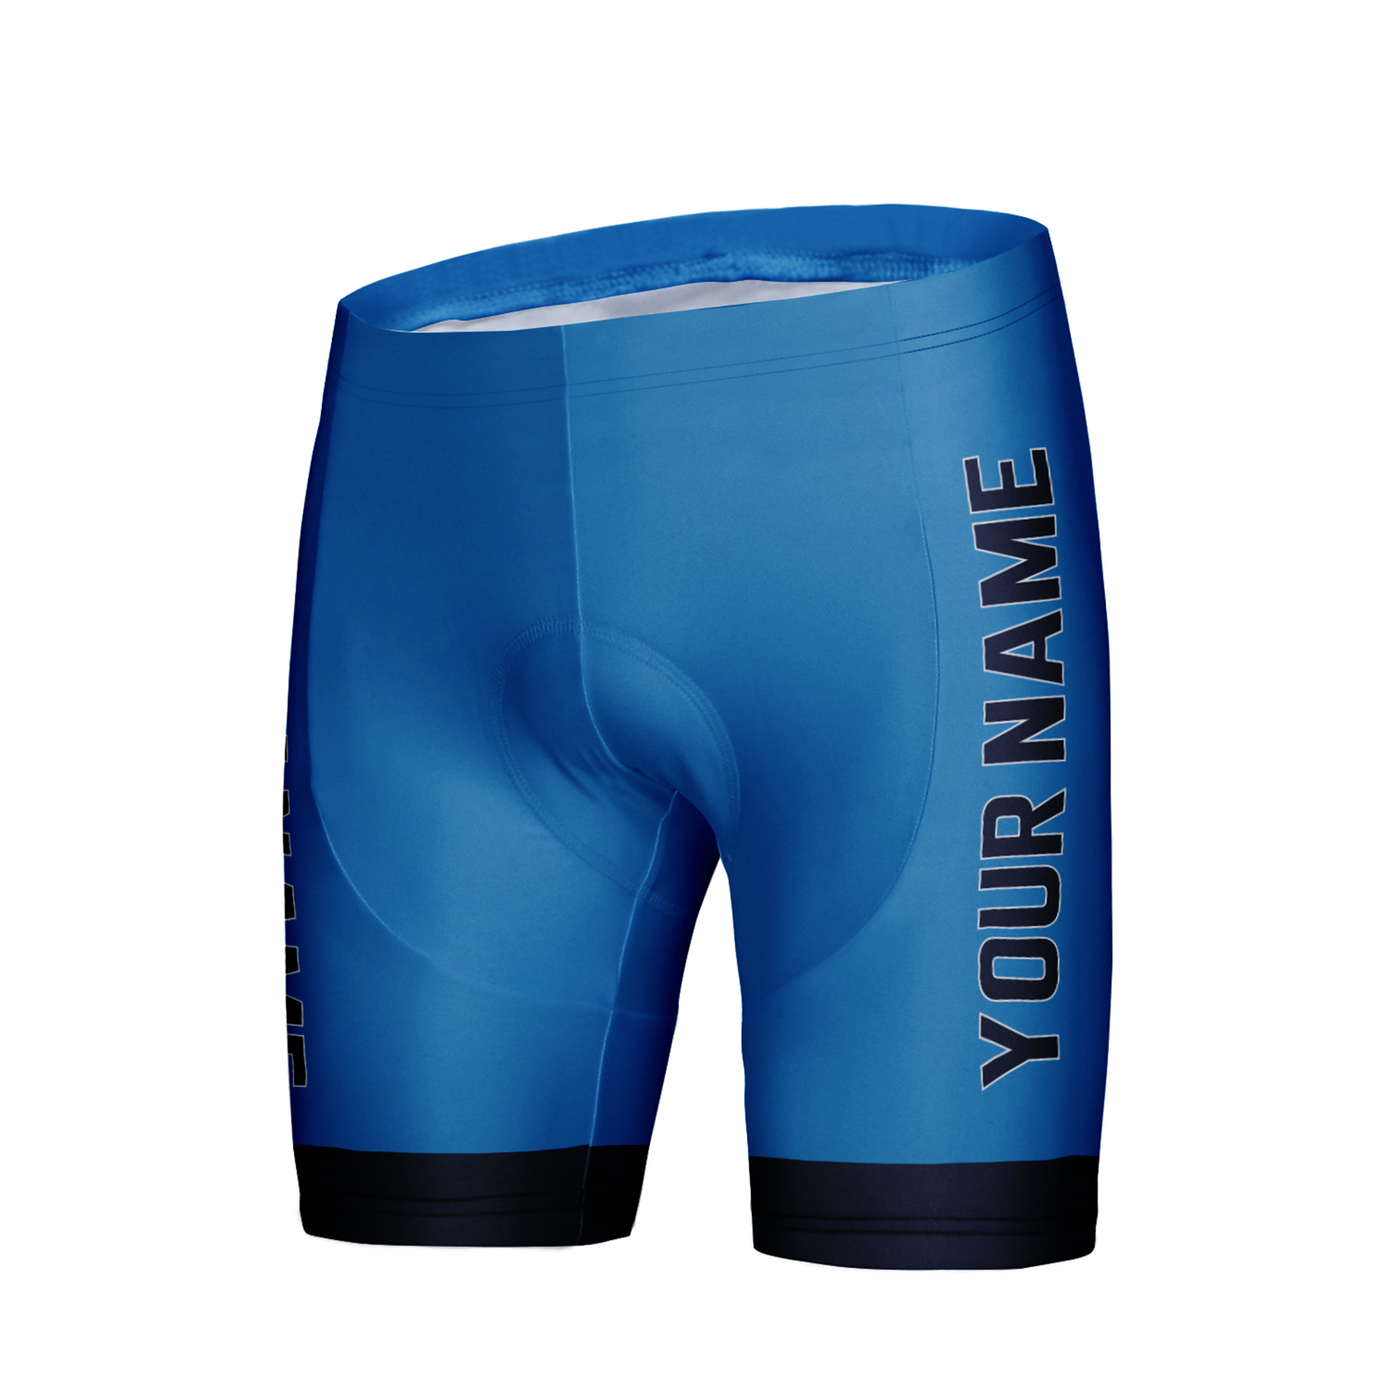 Customized Tennessee Team Unisex Cycling Shorts